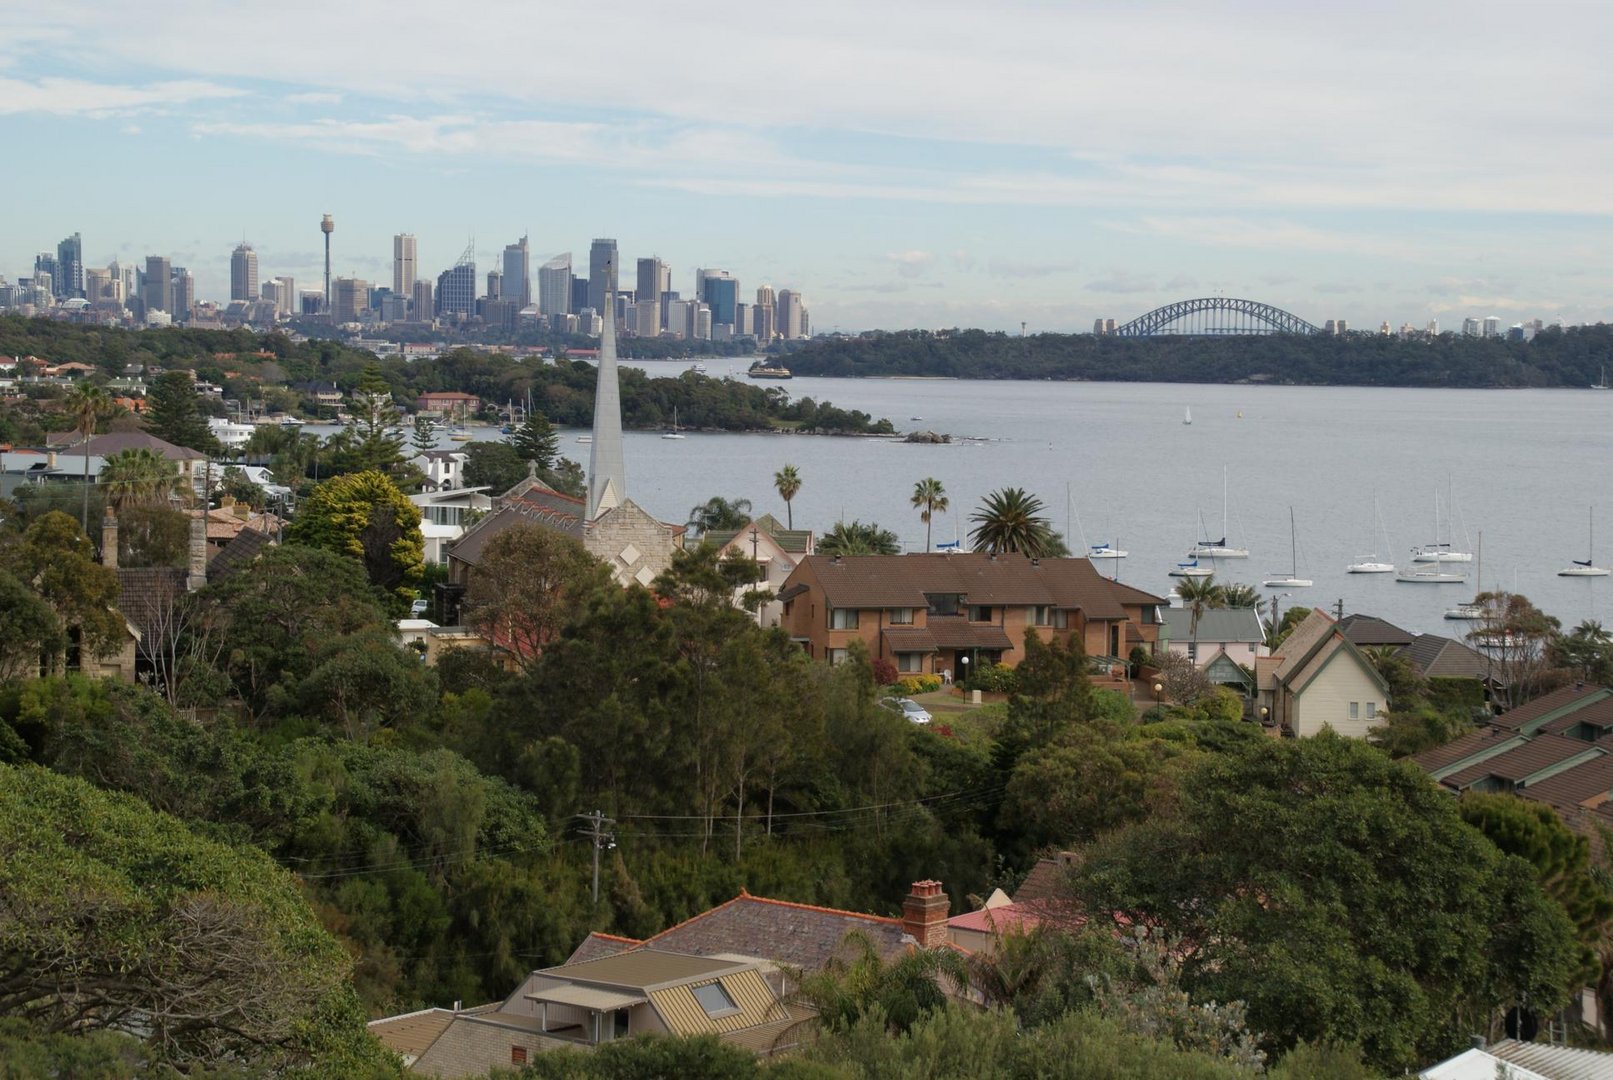 Sydney Overview